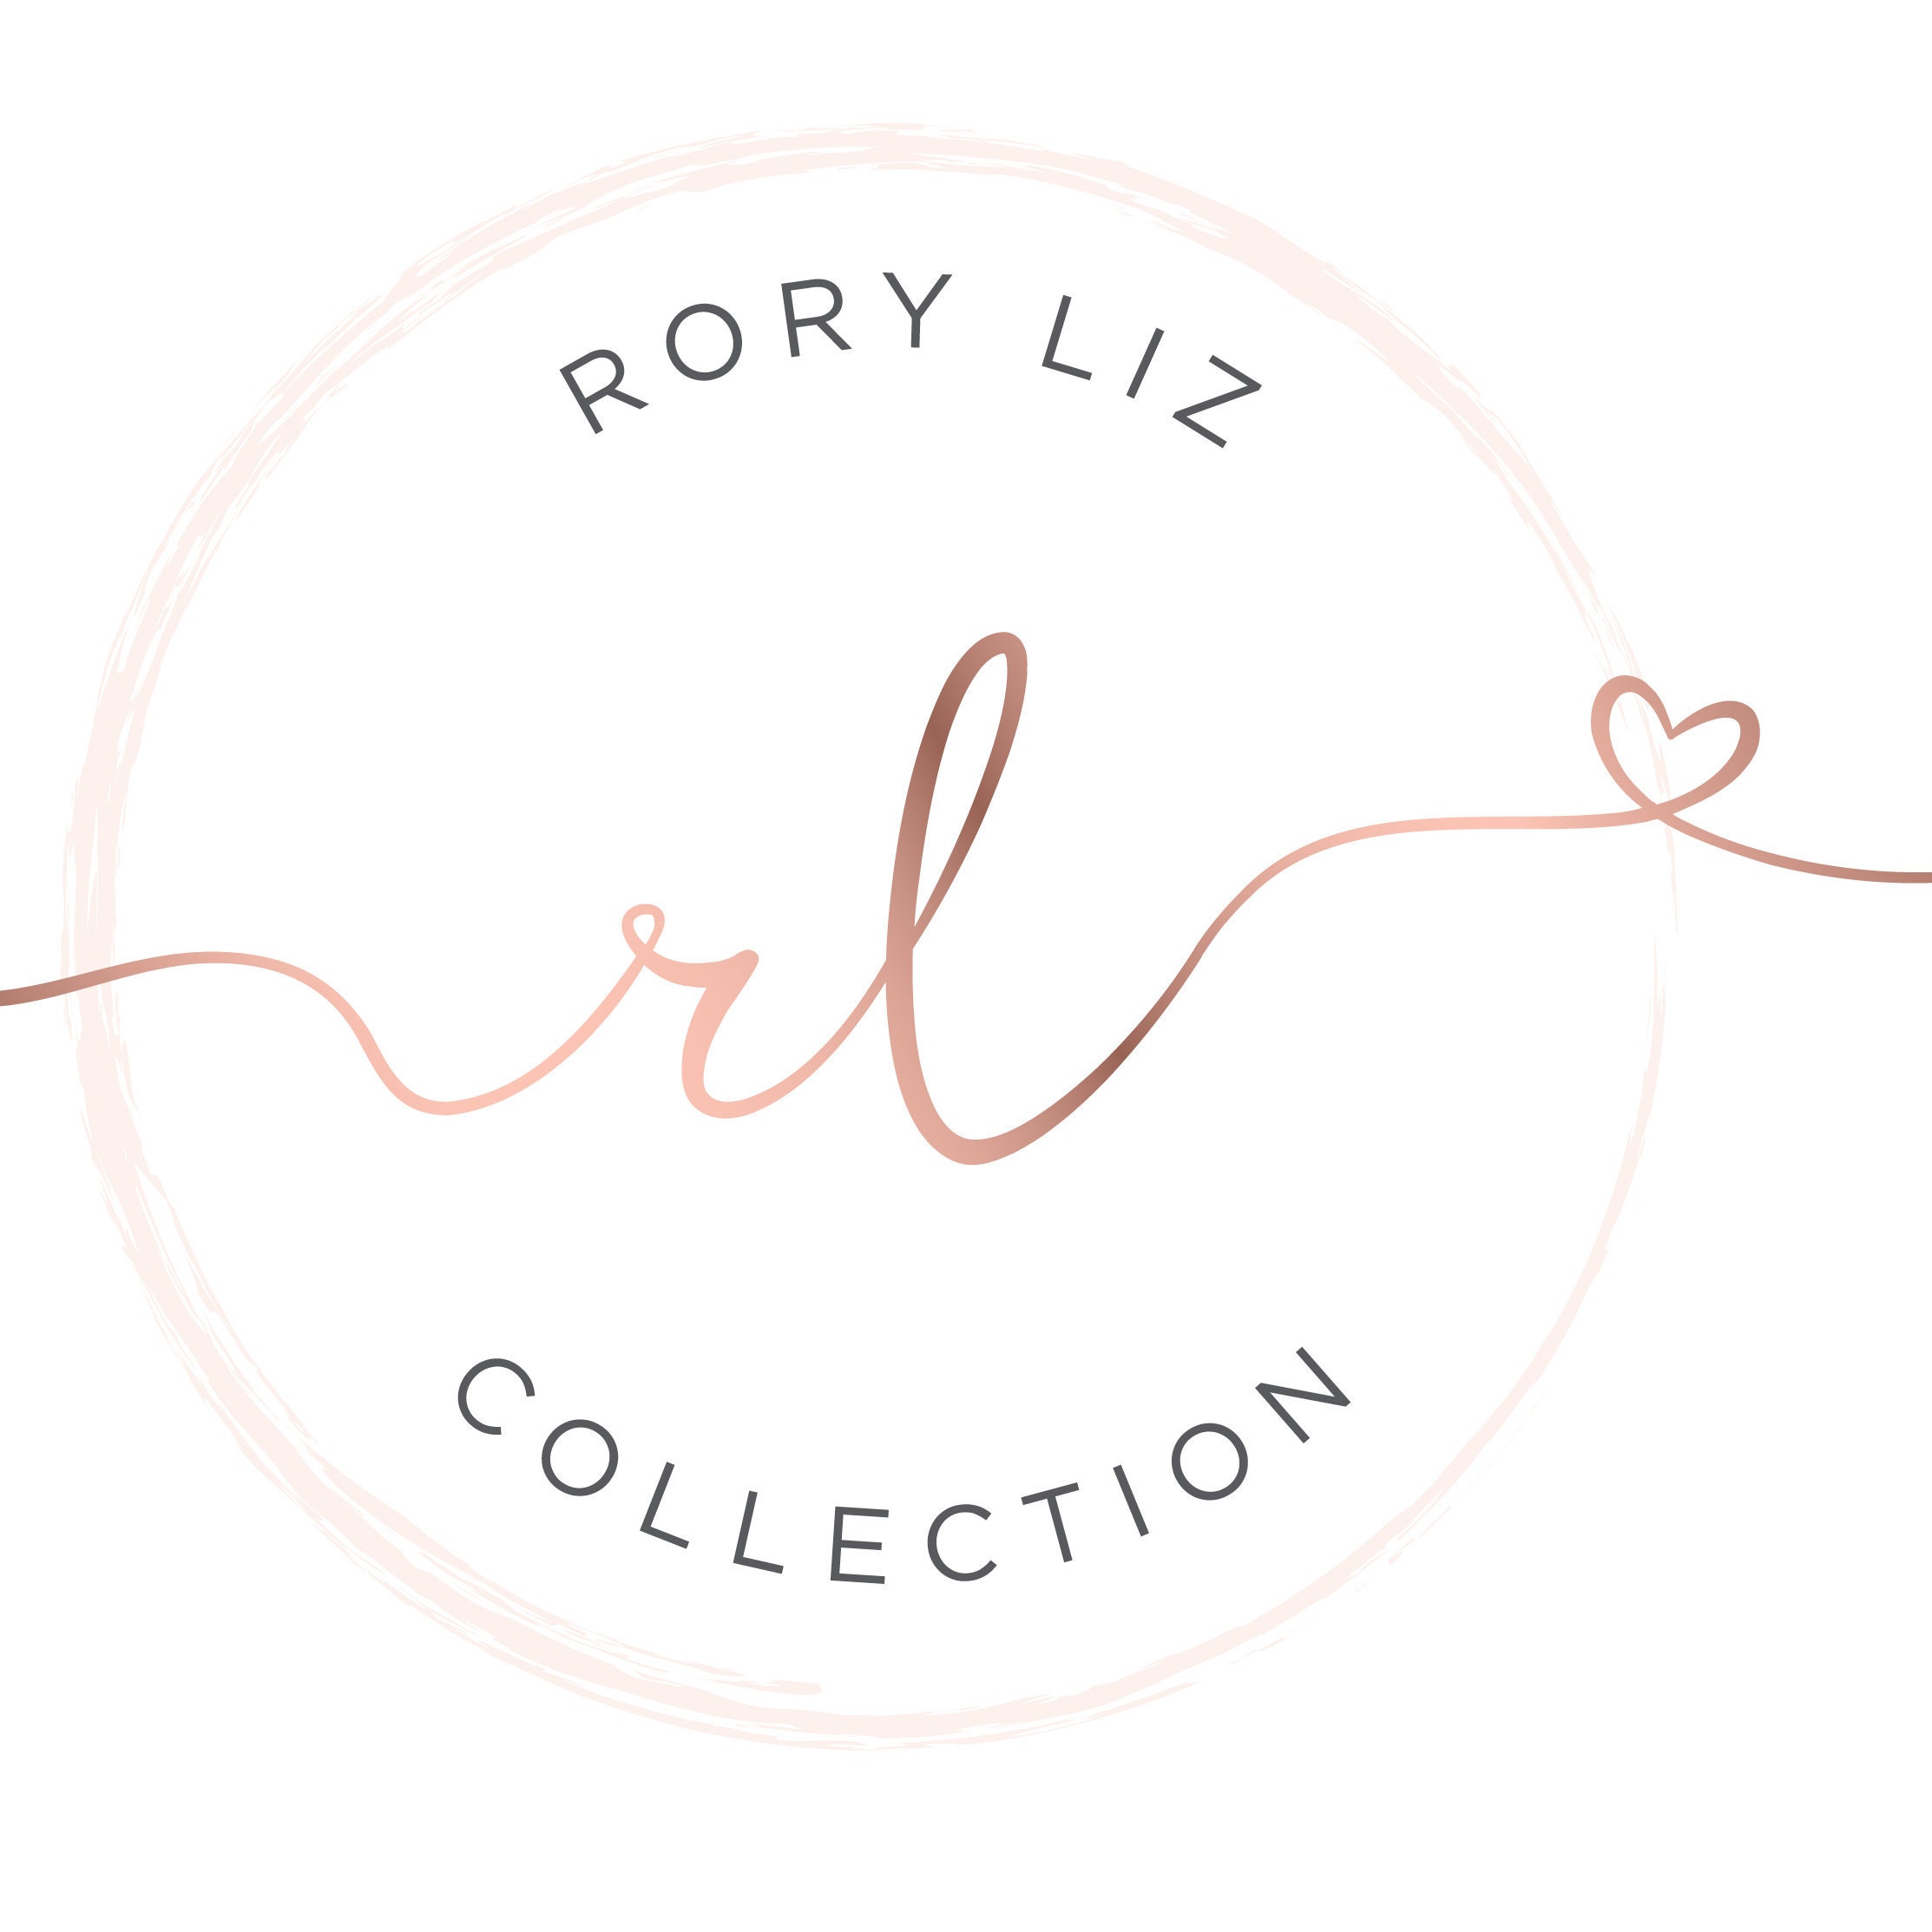 RoryLizCollection - Etsy